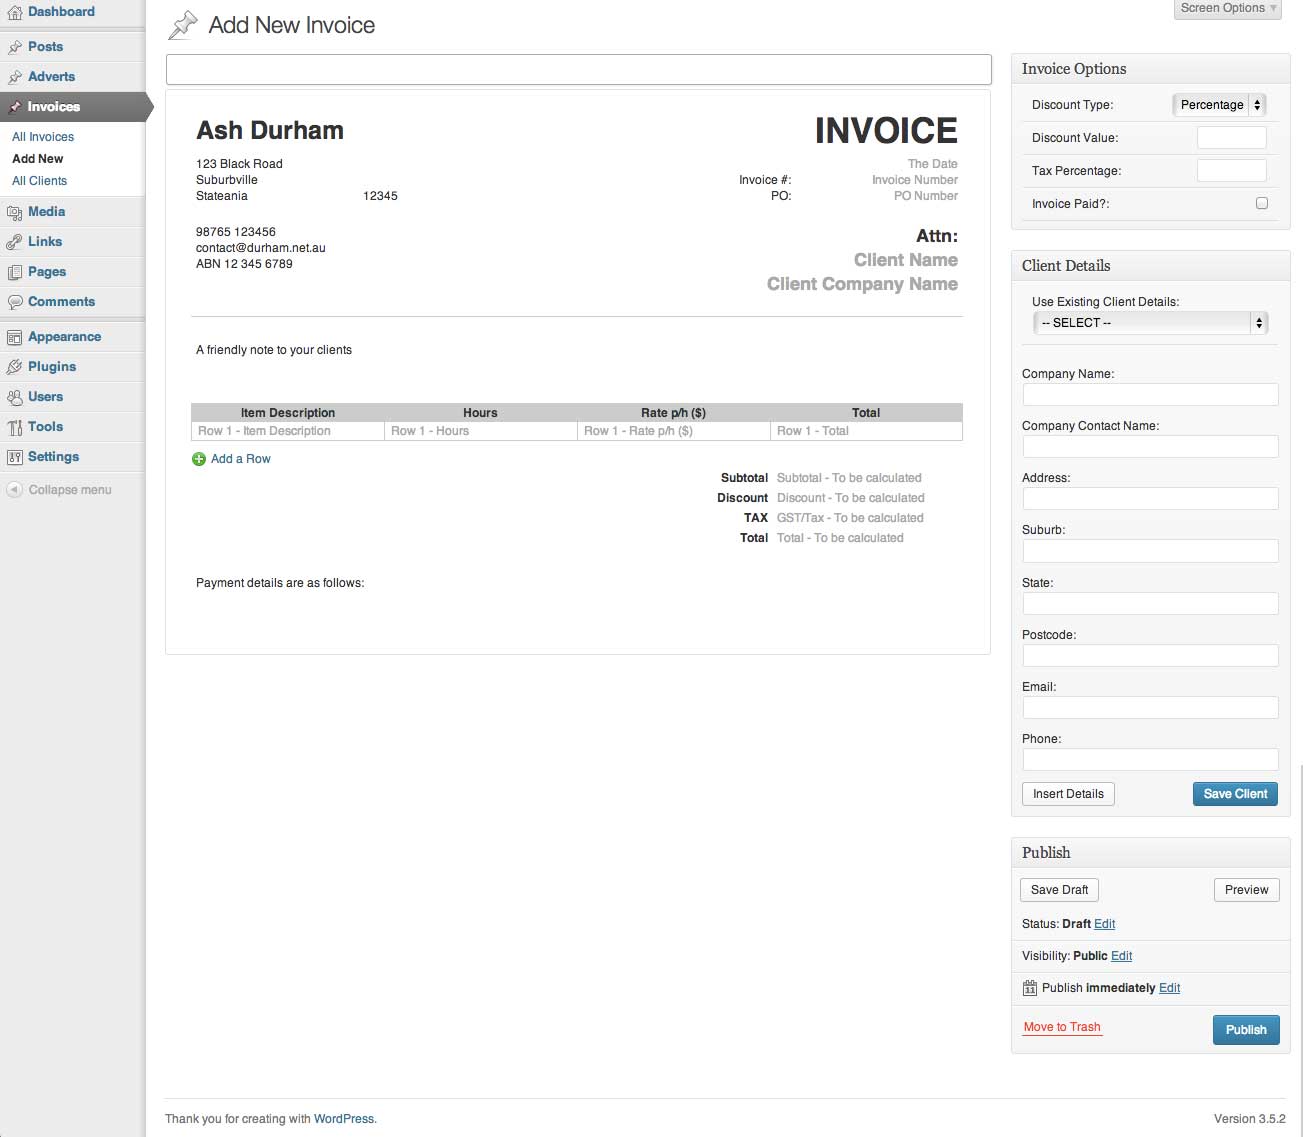 Create new invoice with default data populated from settings